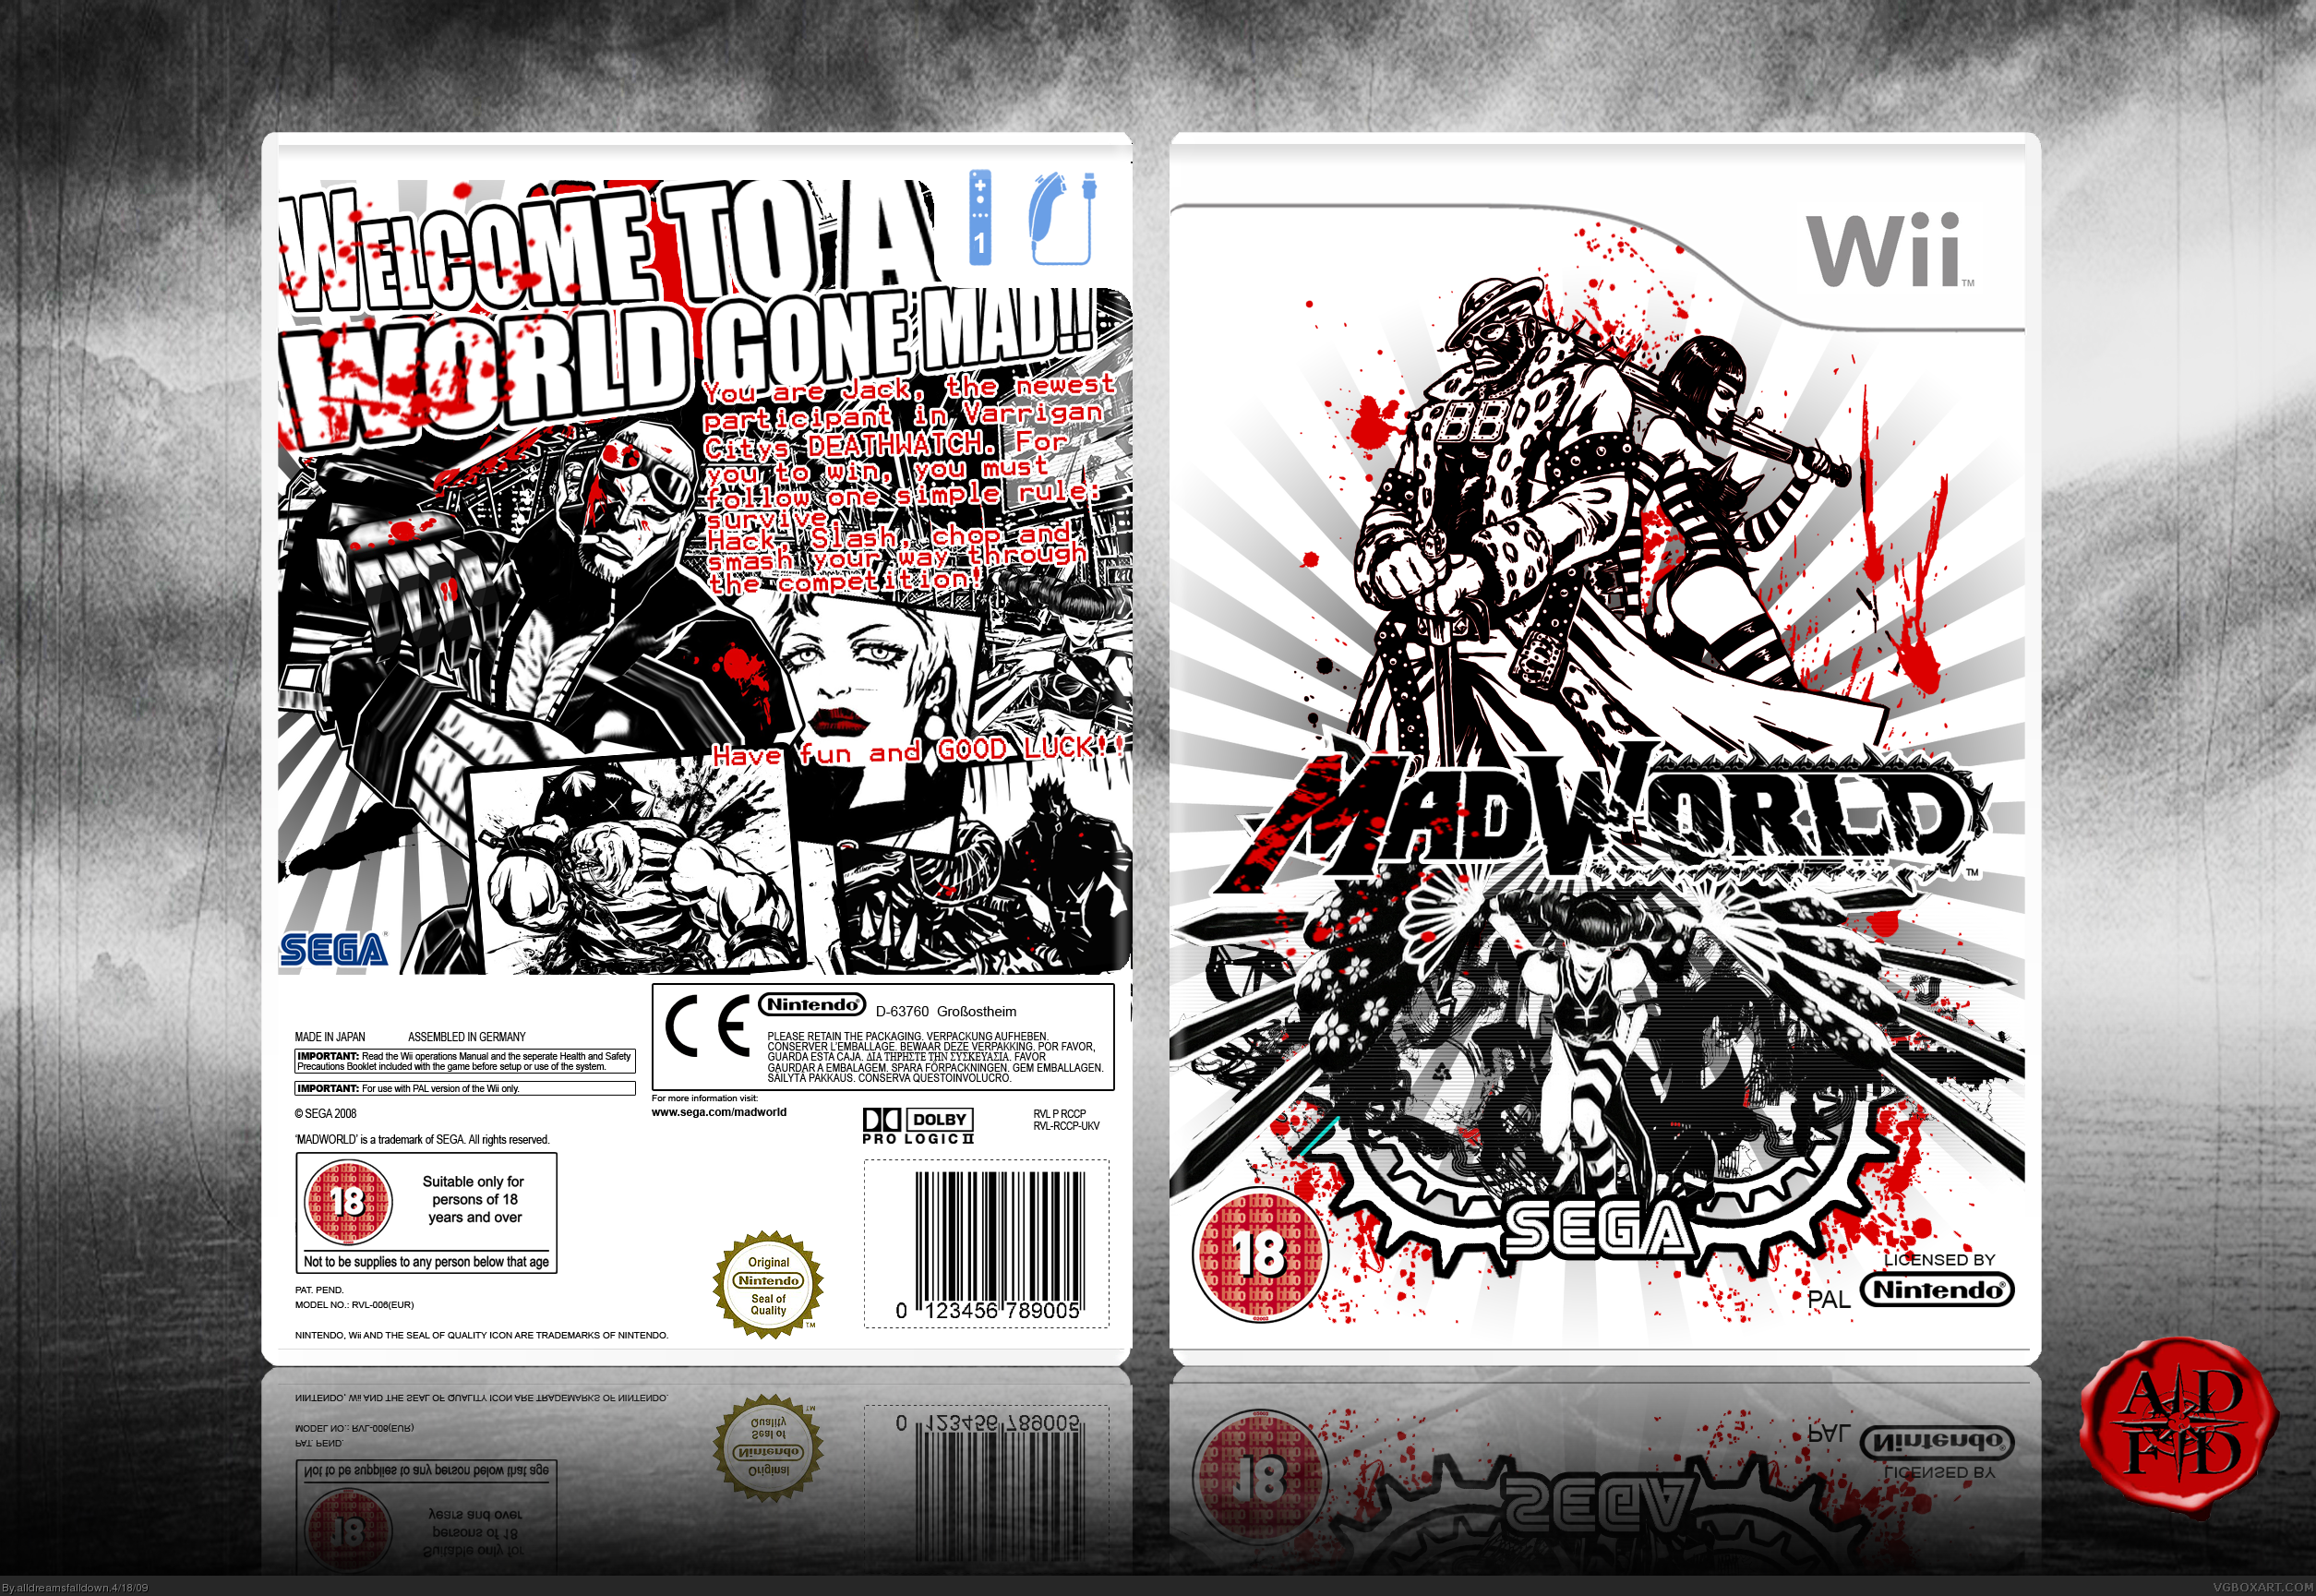 Petition · Madworld wii remake for newer consoles ·